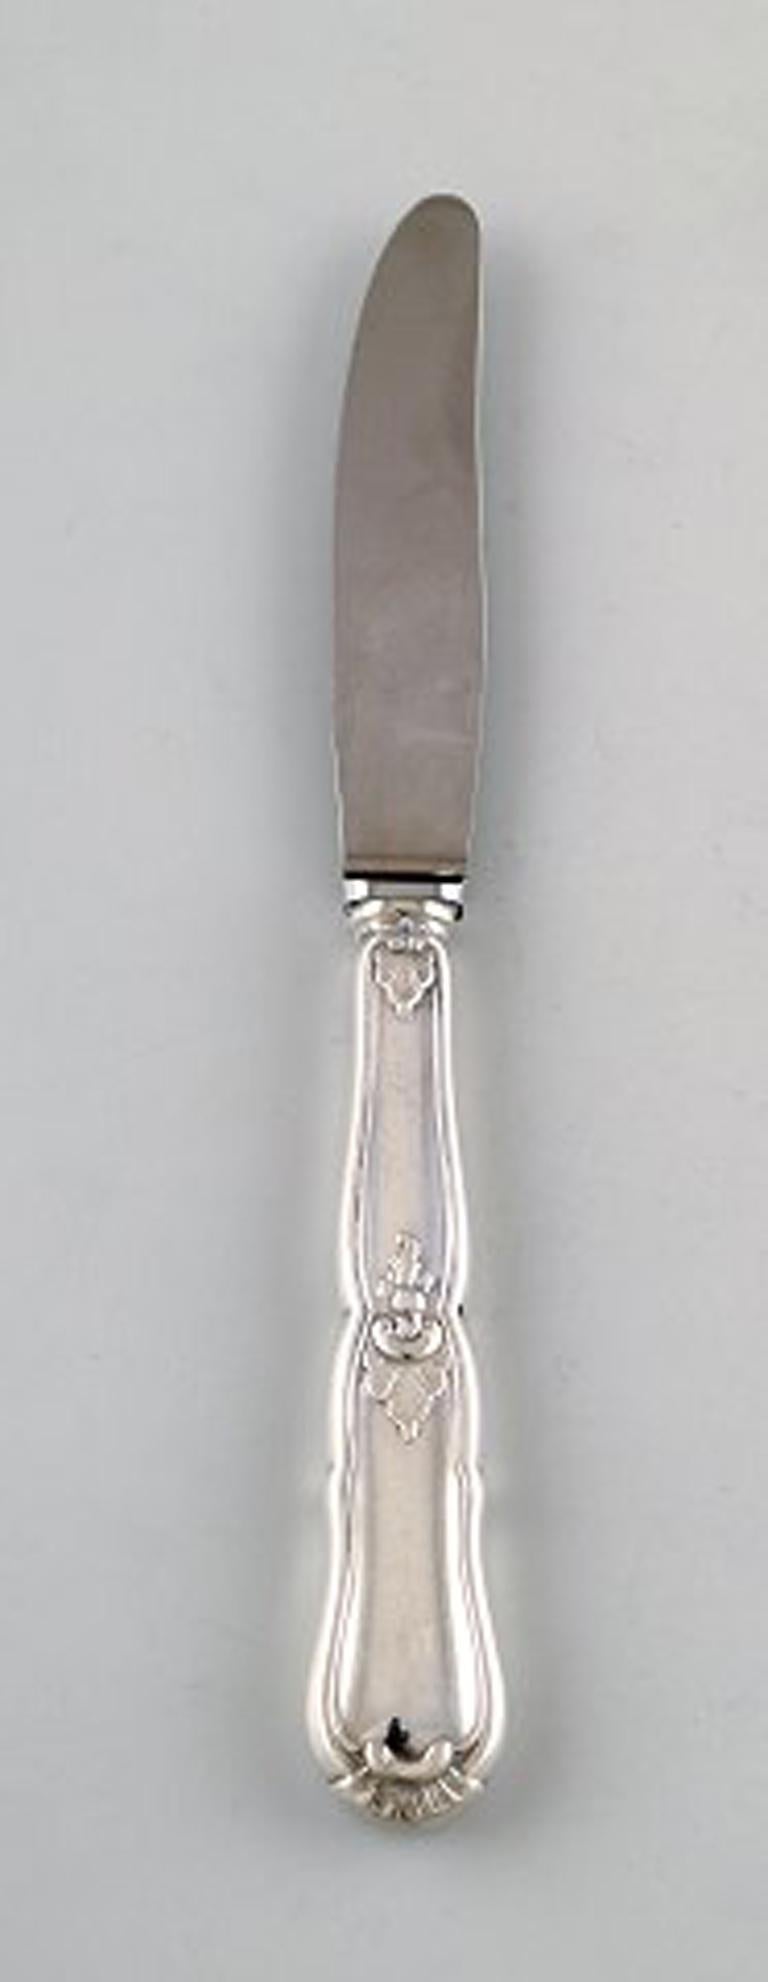 Danish silver 830. 3 fruit knives, circa 1930.
In very good condition.
Stamped: 830S, PF.
Measures: 18.5 cm.